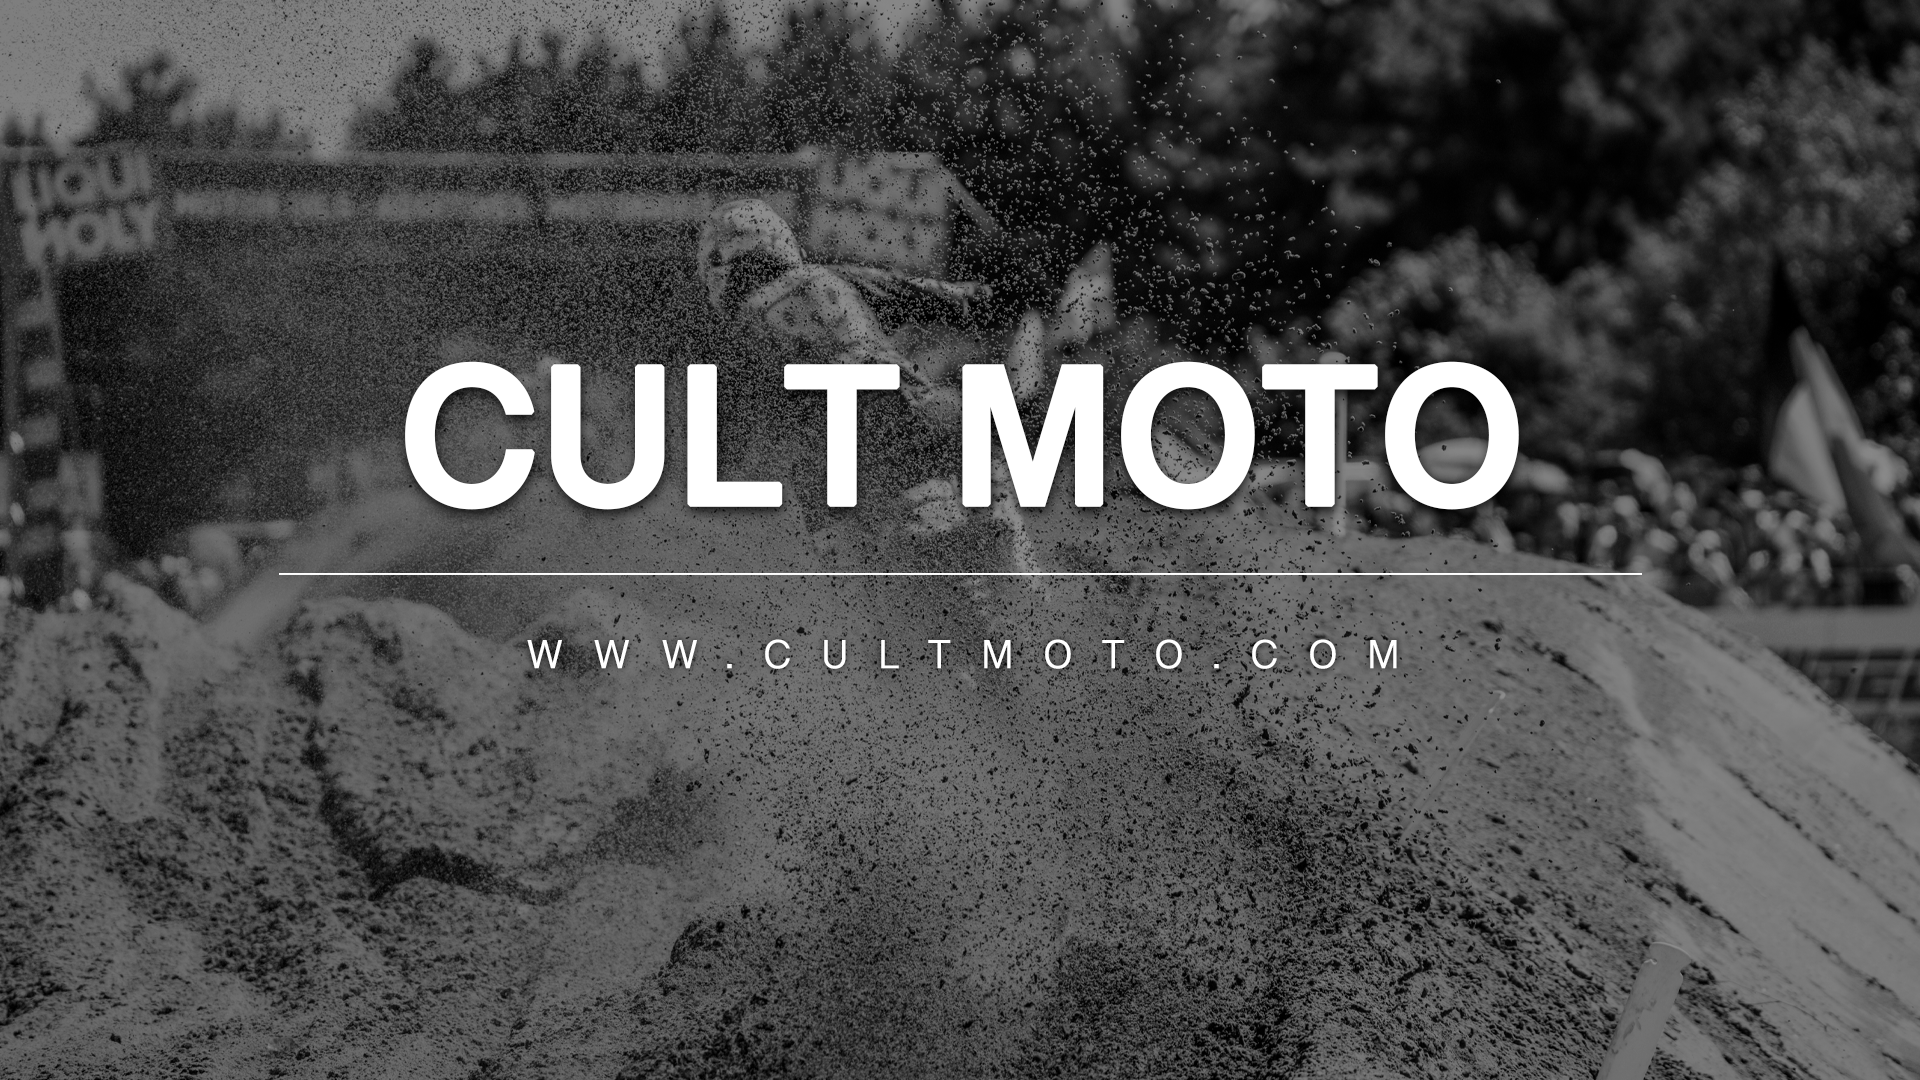 Welcome to Cult Moto